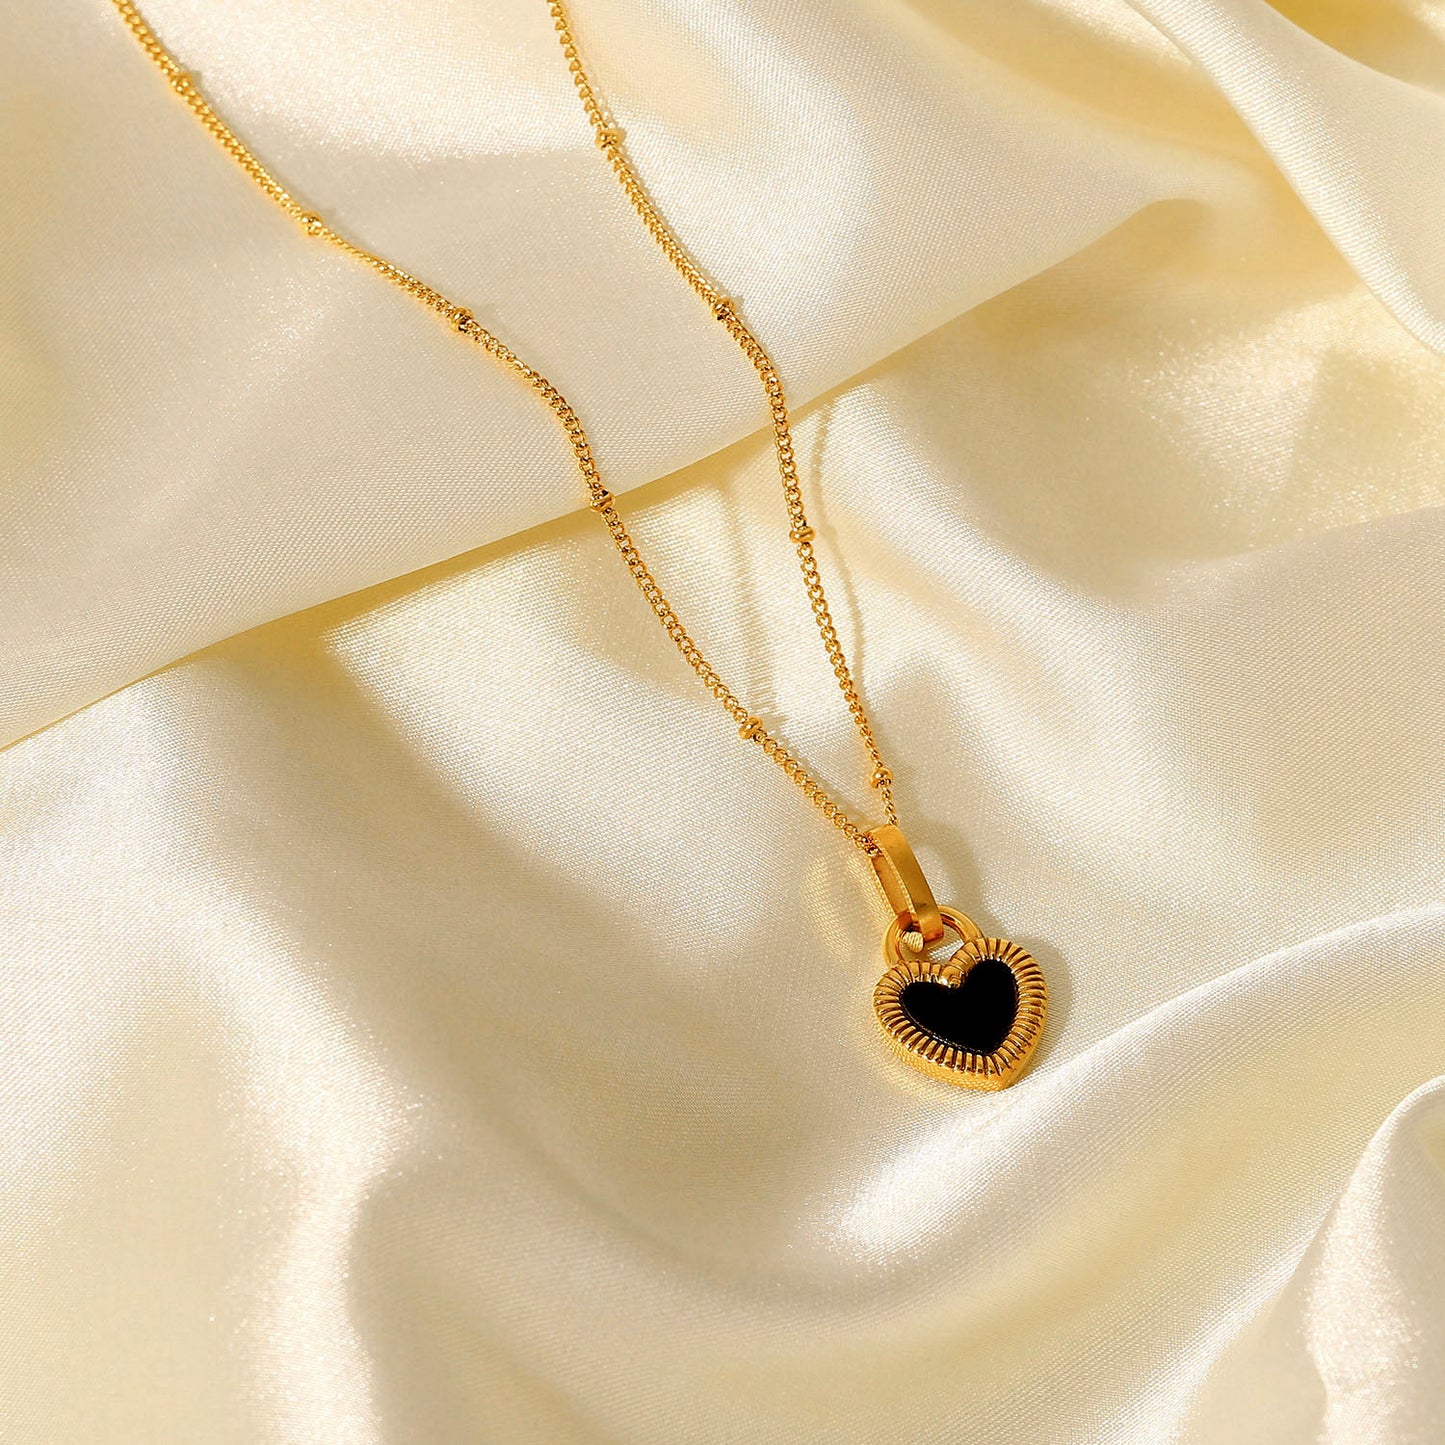 Gold Heart Lock Necklace